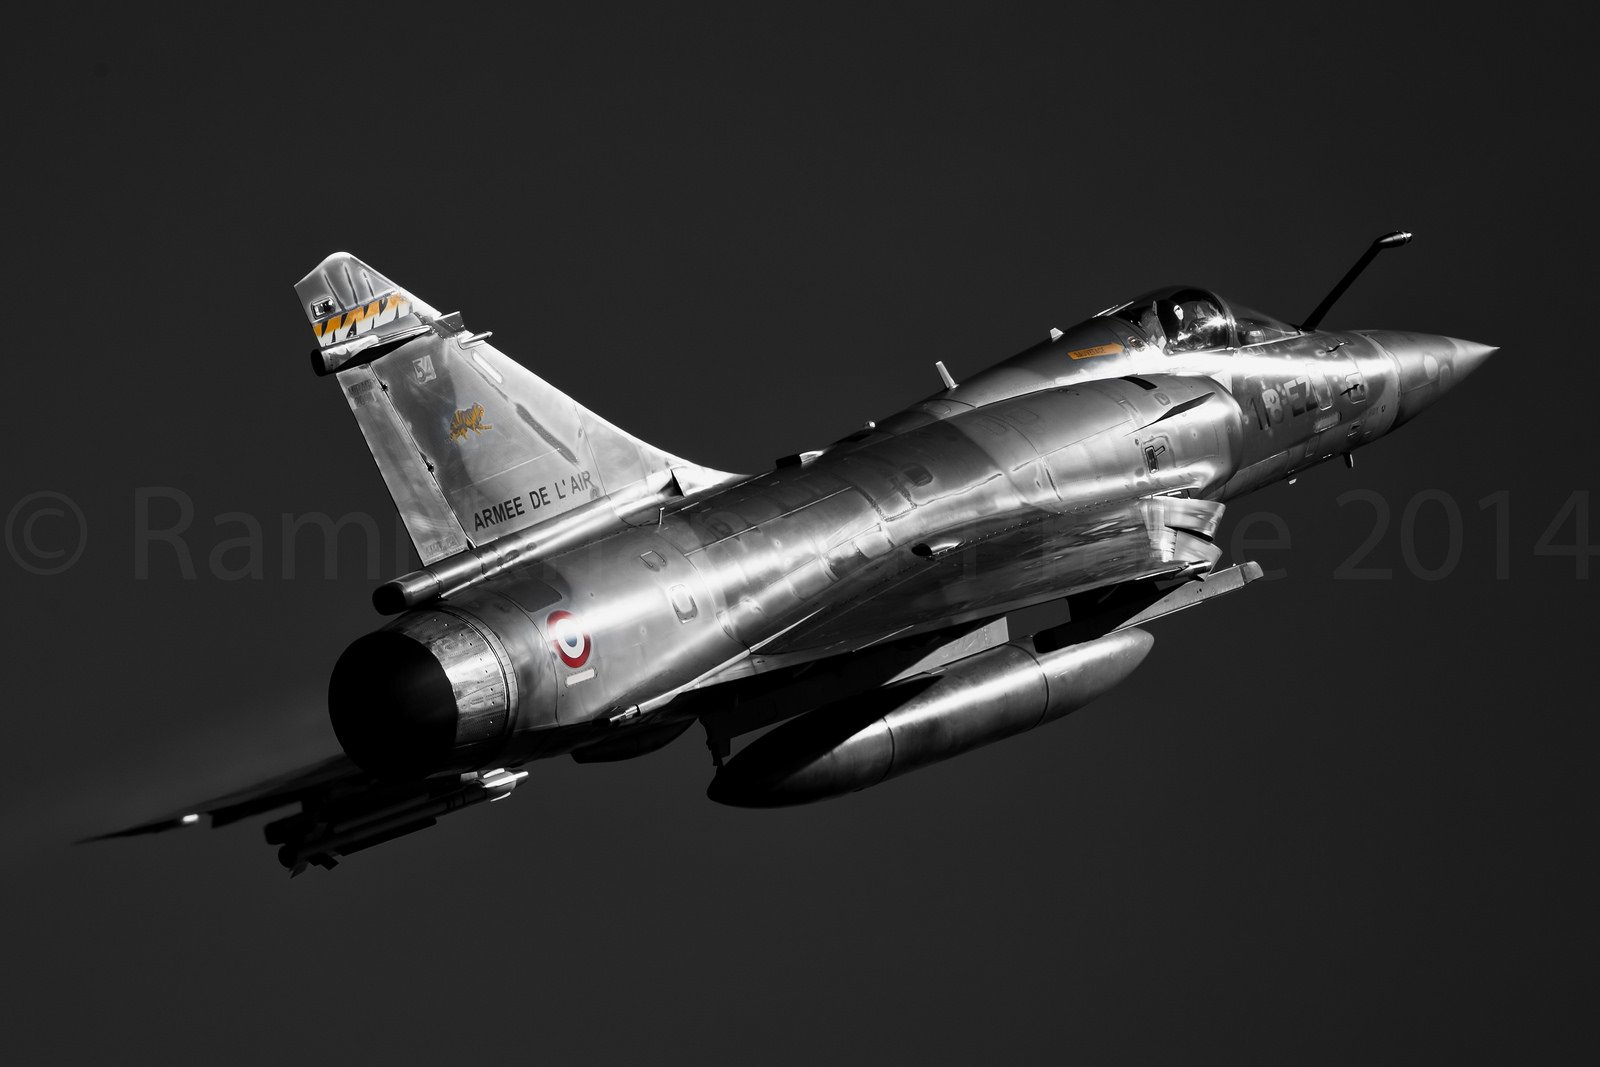 2000, Aircraft, Army, Attack, Dassault, Fighter, Jet, Military, Mirage, French Wallpaper